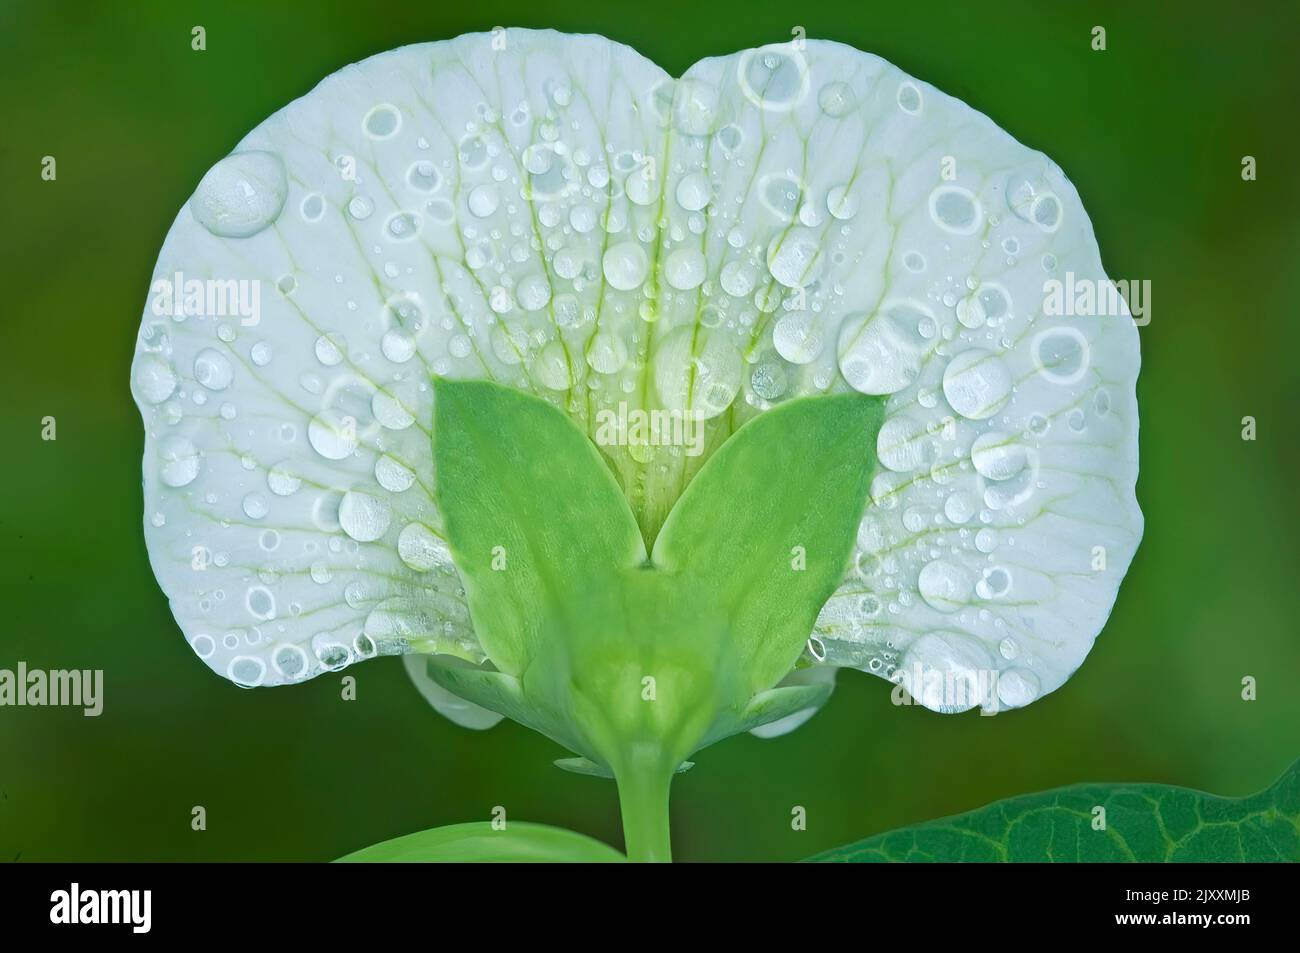 Garden pea blossom with water droplets Stock Photo